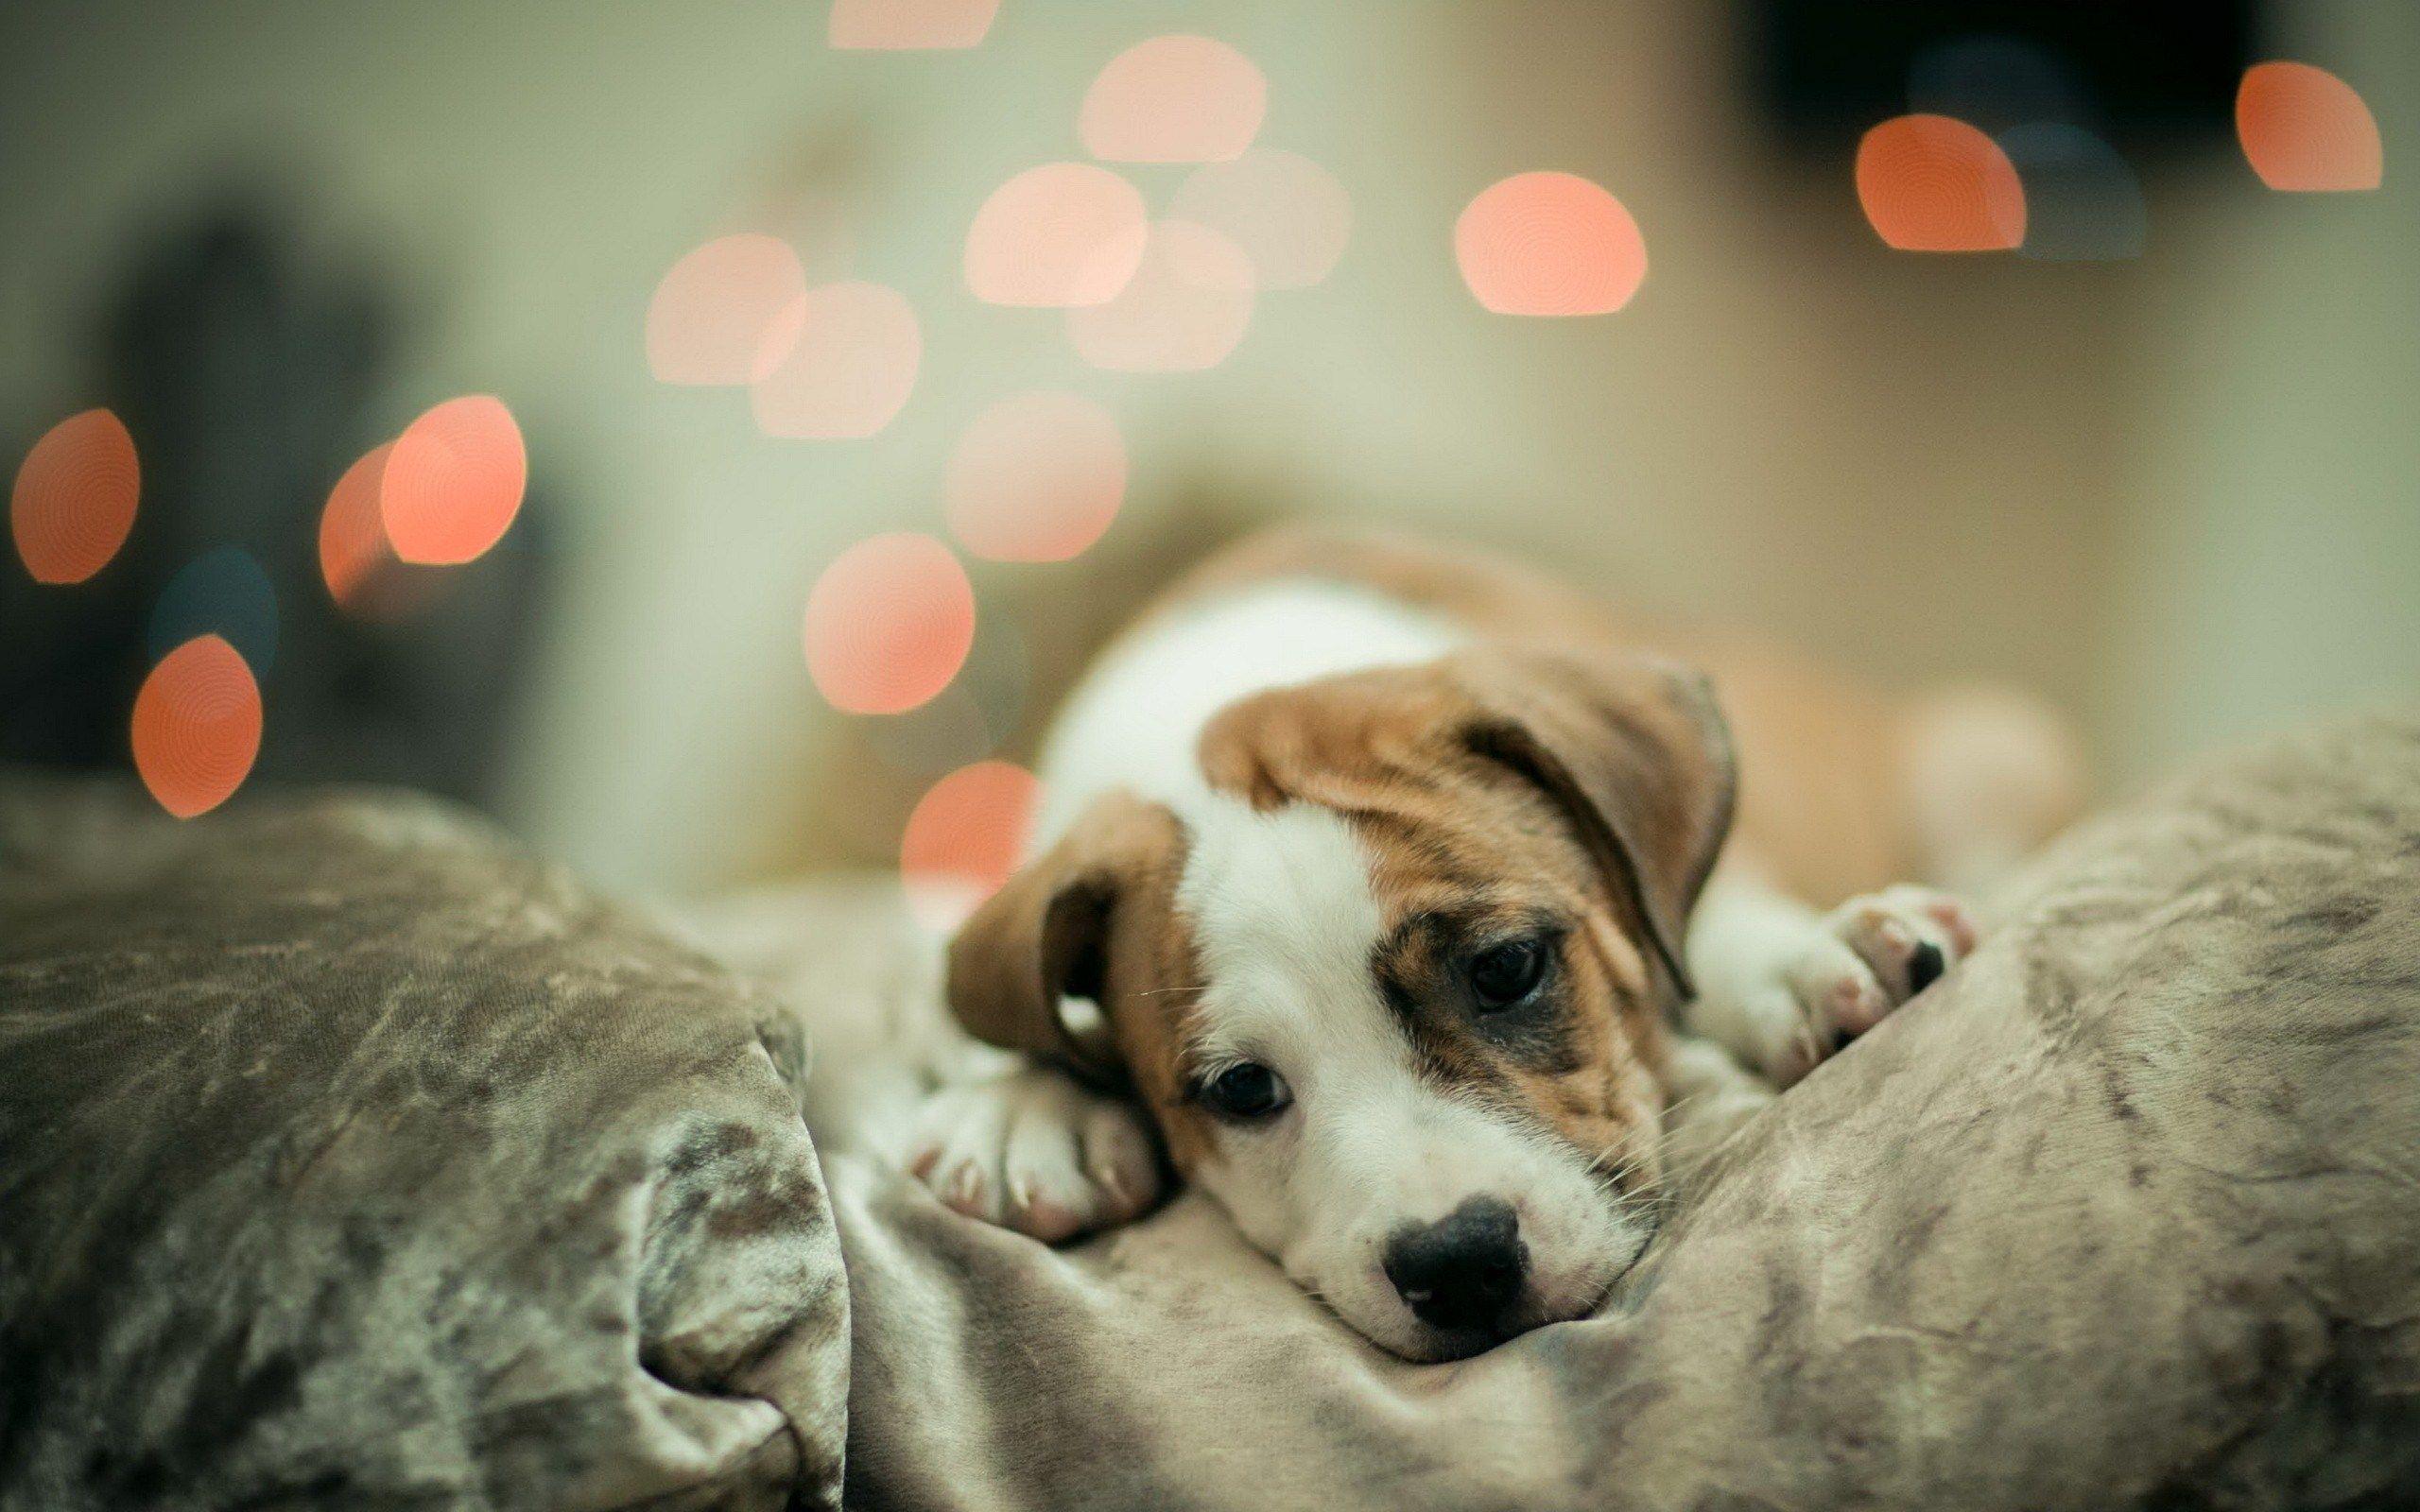 Cute Dogs Wallpaper Some dogs like to sleep in a. Cute dog